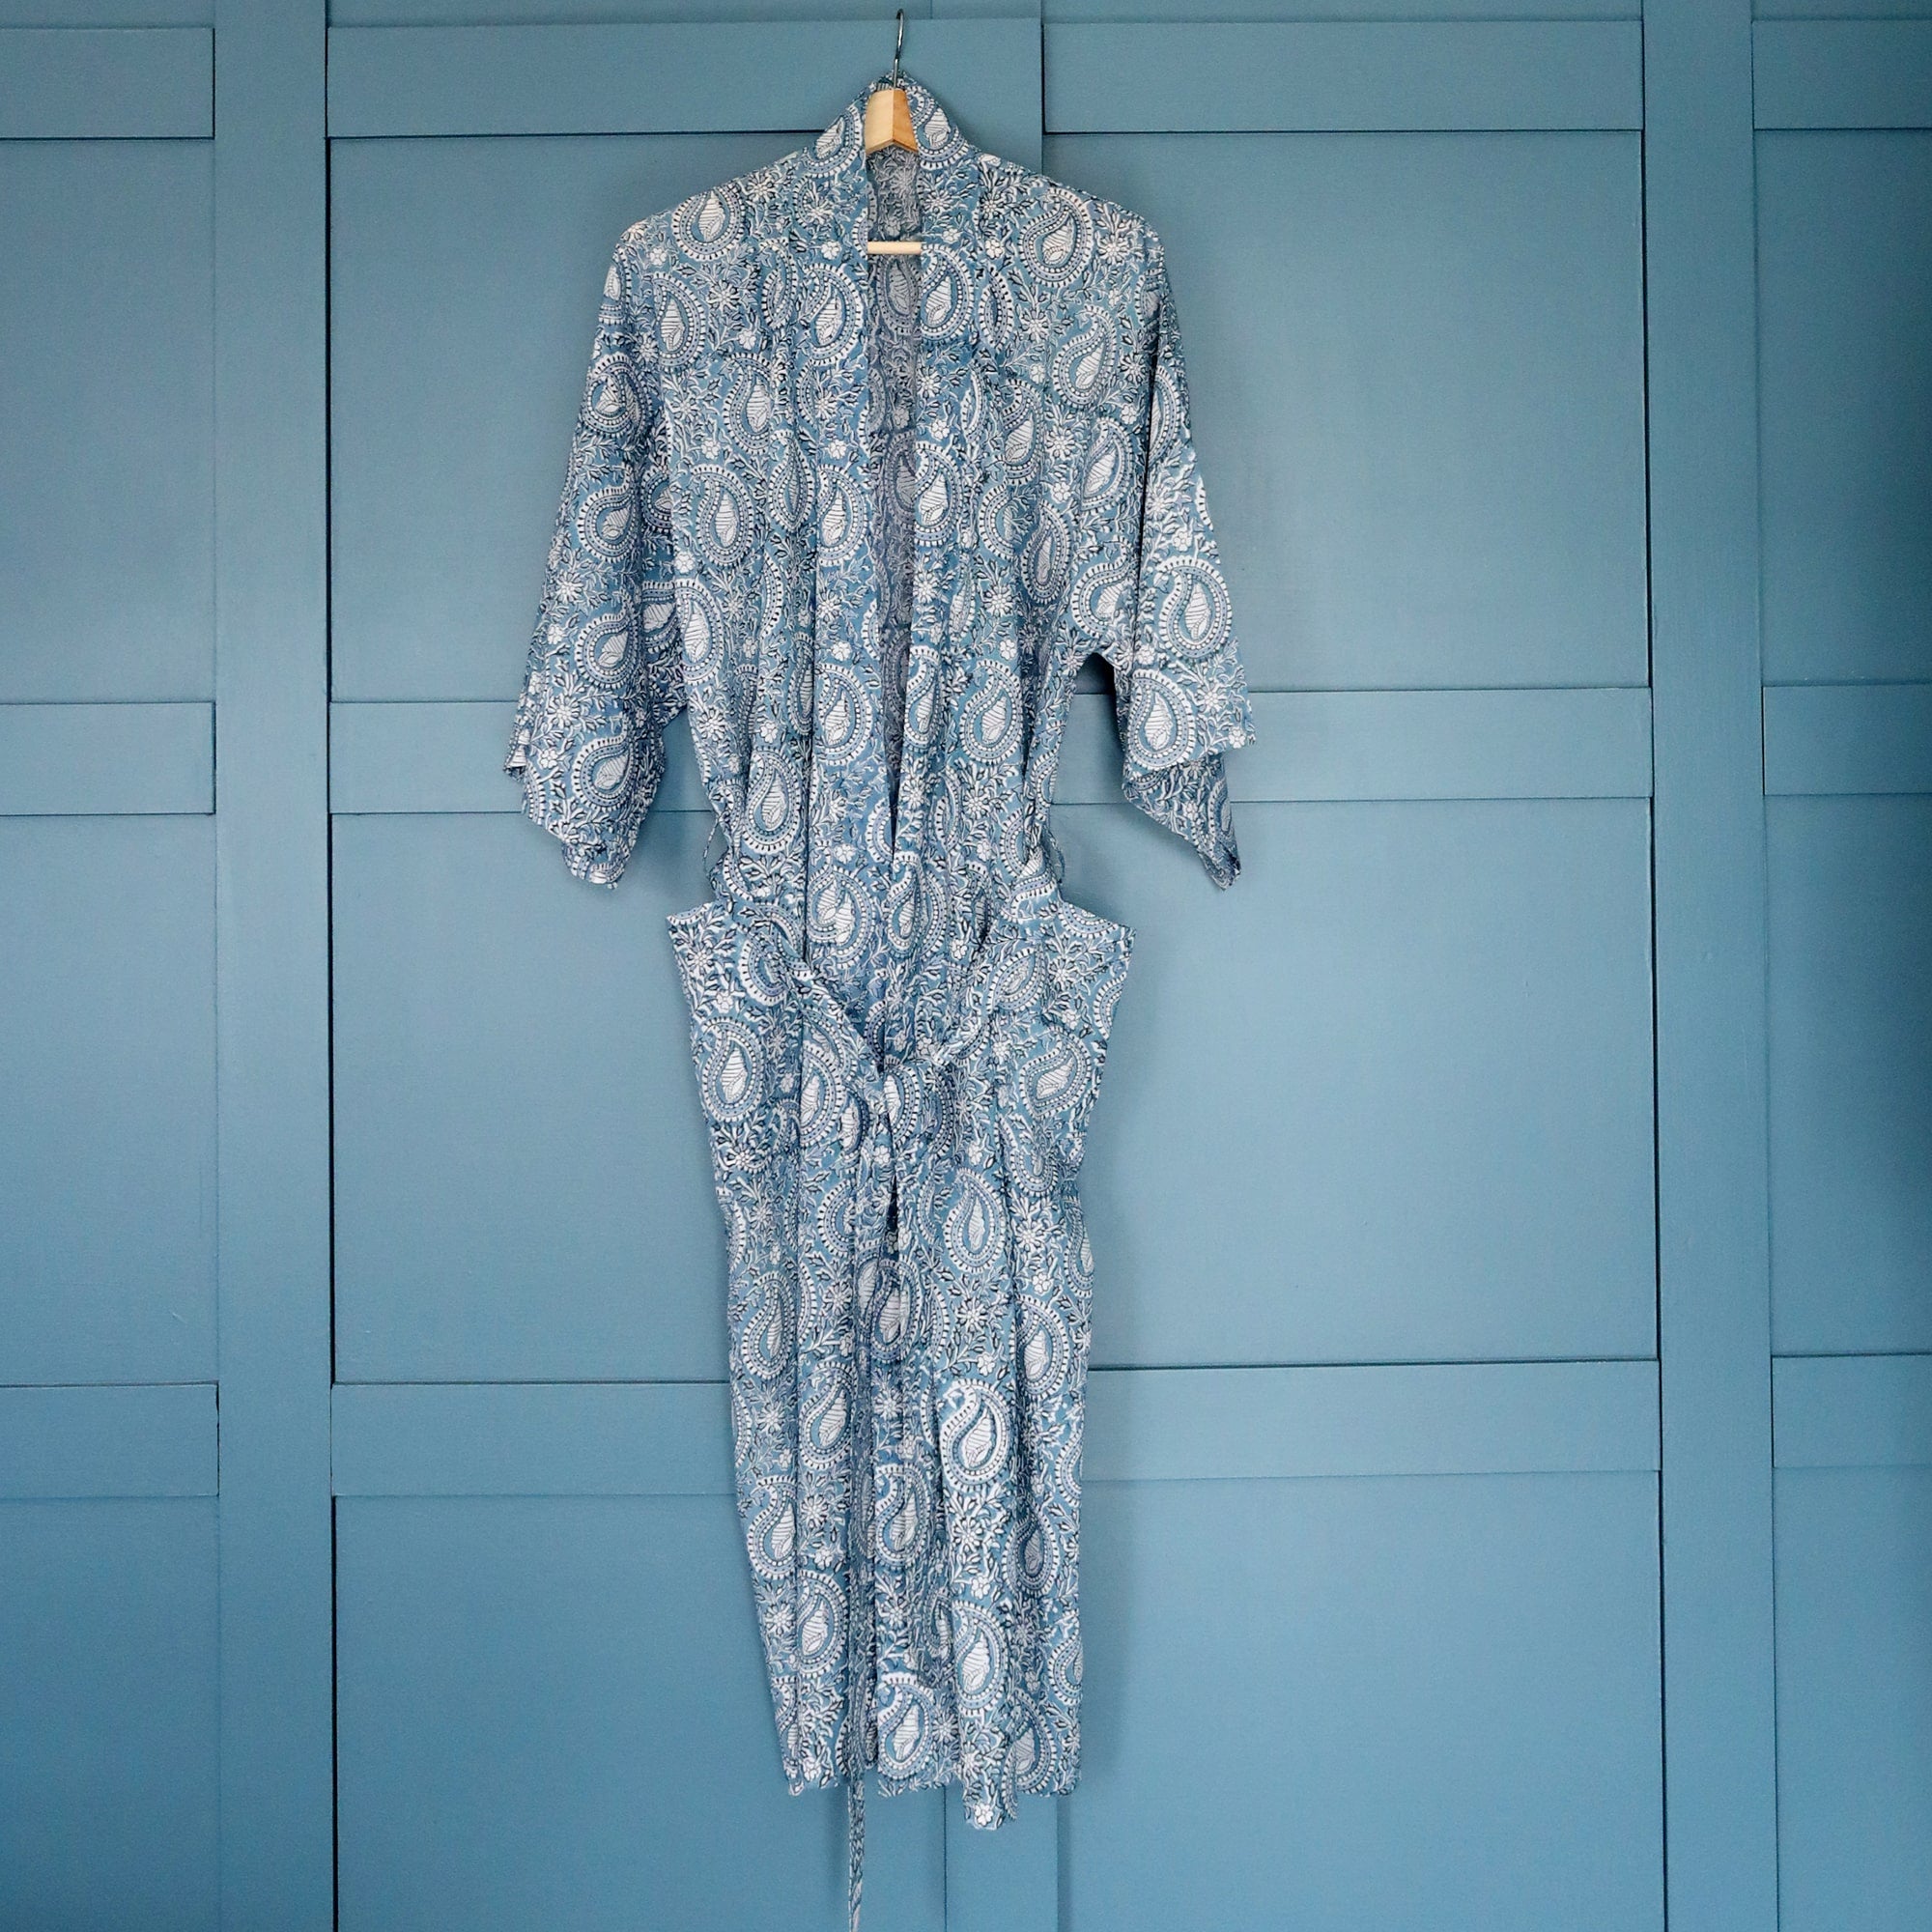 Azure Paisley dressing gown which is Hand block printed fabric in a soft blue  on a hanger in front of blue cupboards.